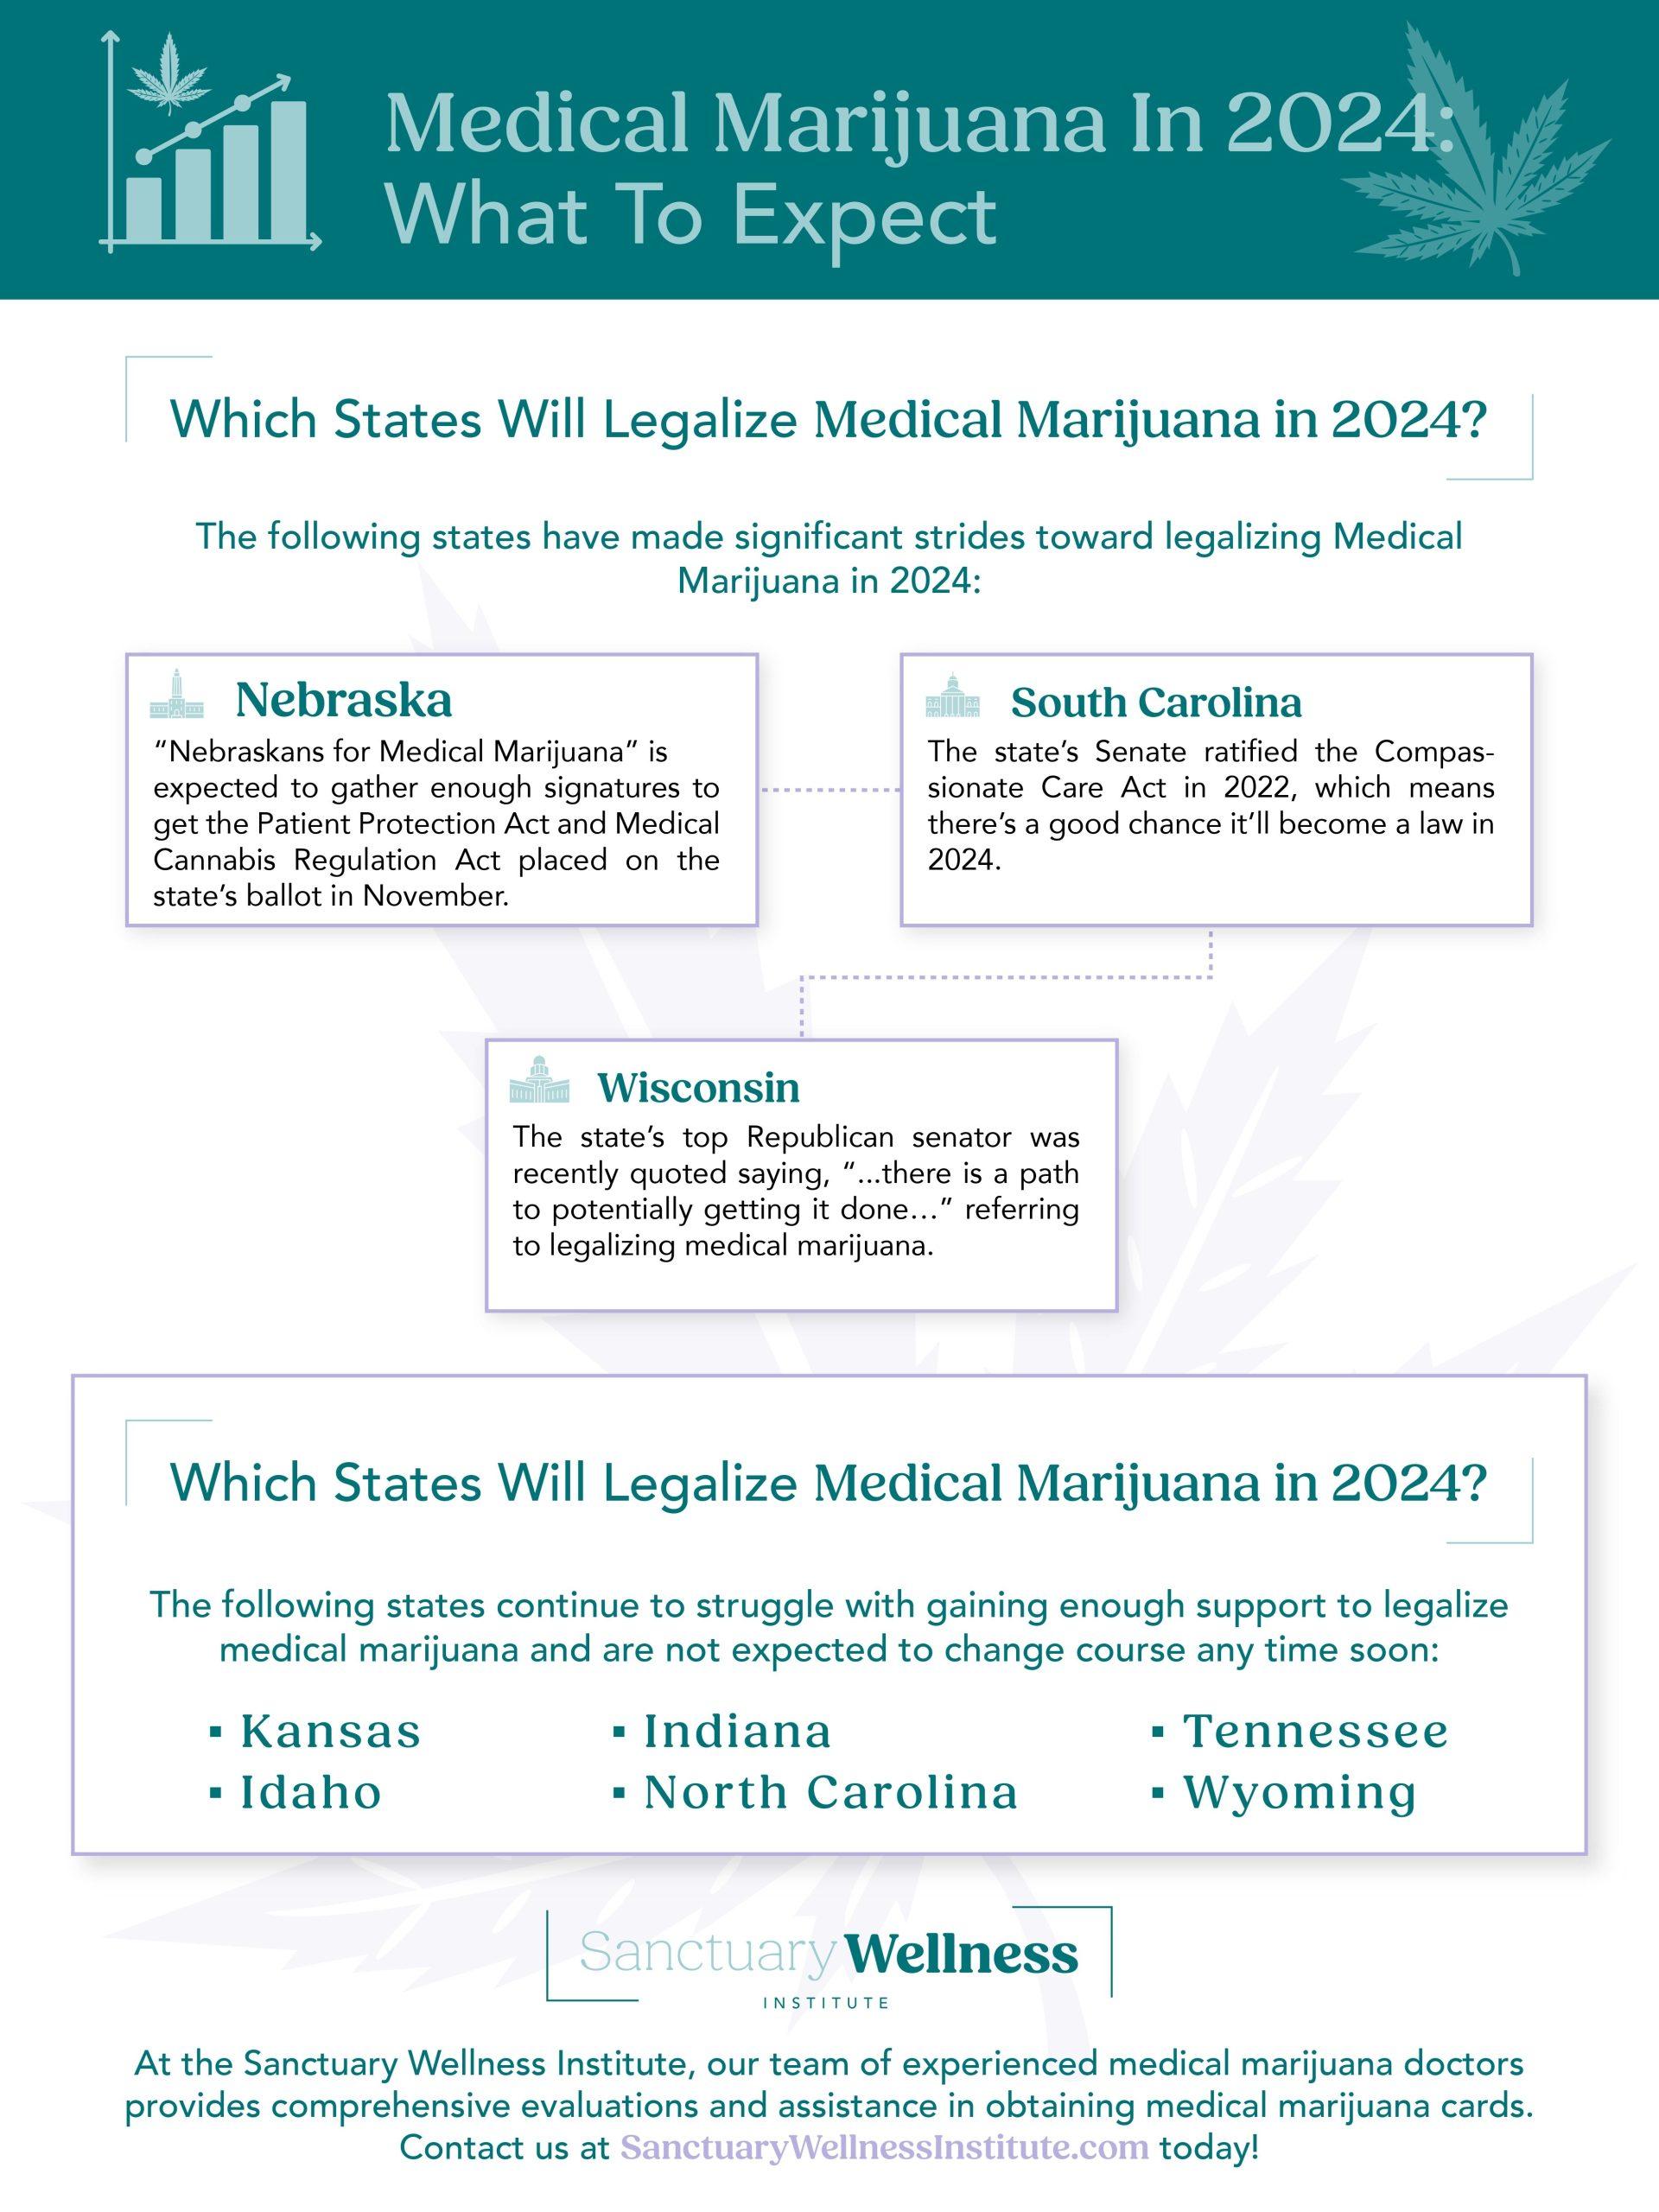 Which States Will Legalize Medical Marijuana in 2024